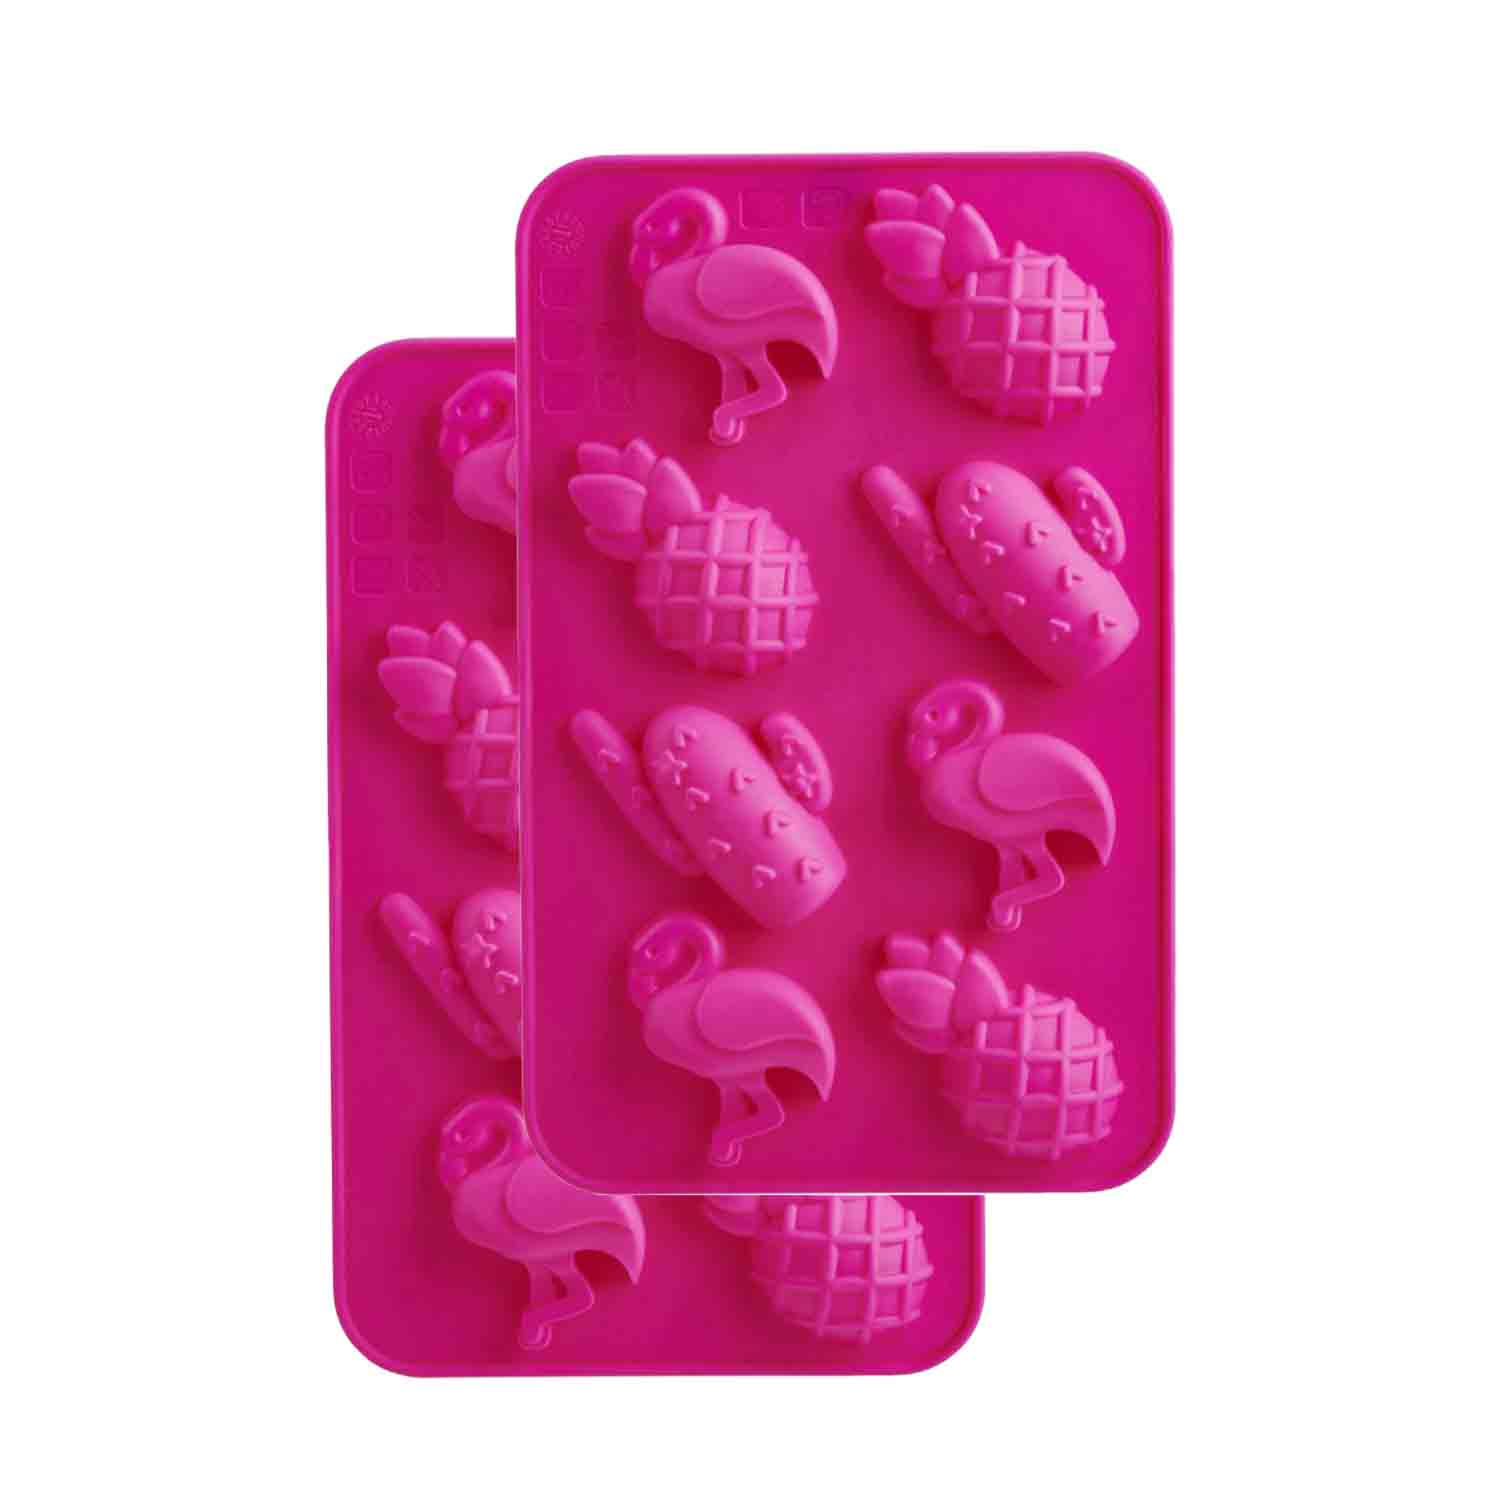 Flamingo and Pineapple Silicone Chocolate Molds